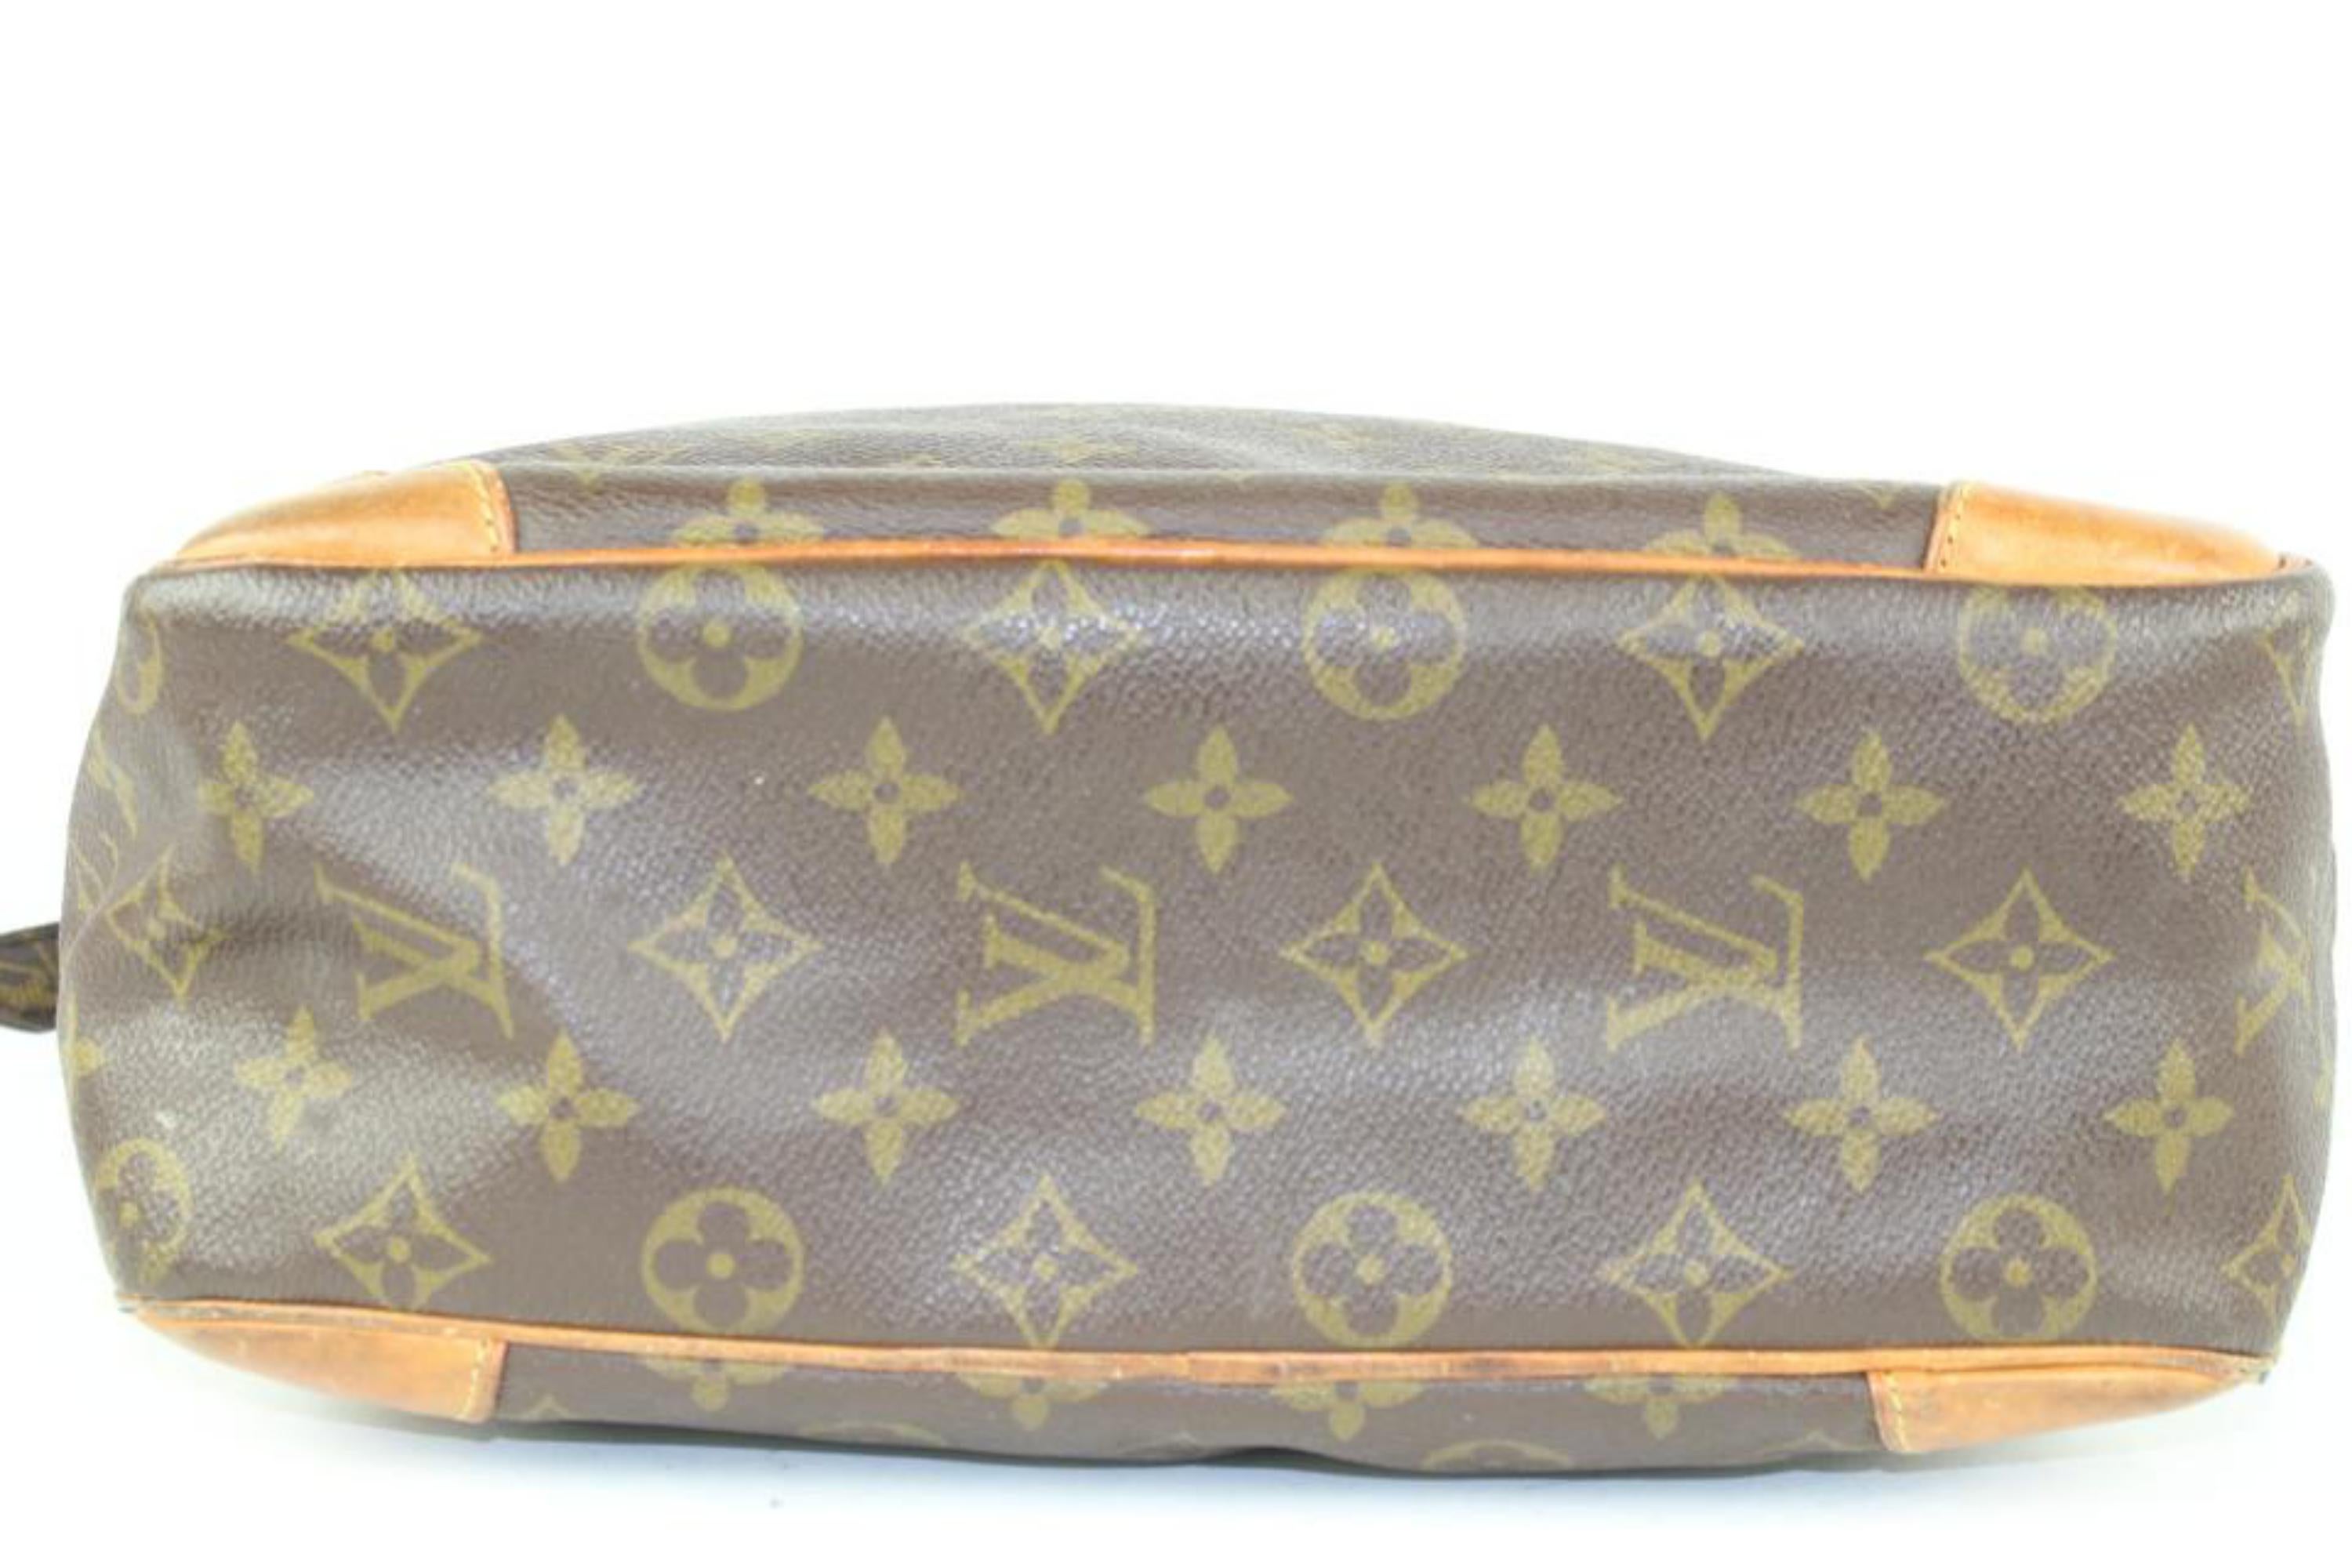 Louis Vuitton Monogram Danube GM Shoulder bag 1LV108 In Fair Condition For Sale In Dix hills, NY